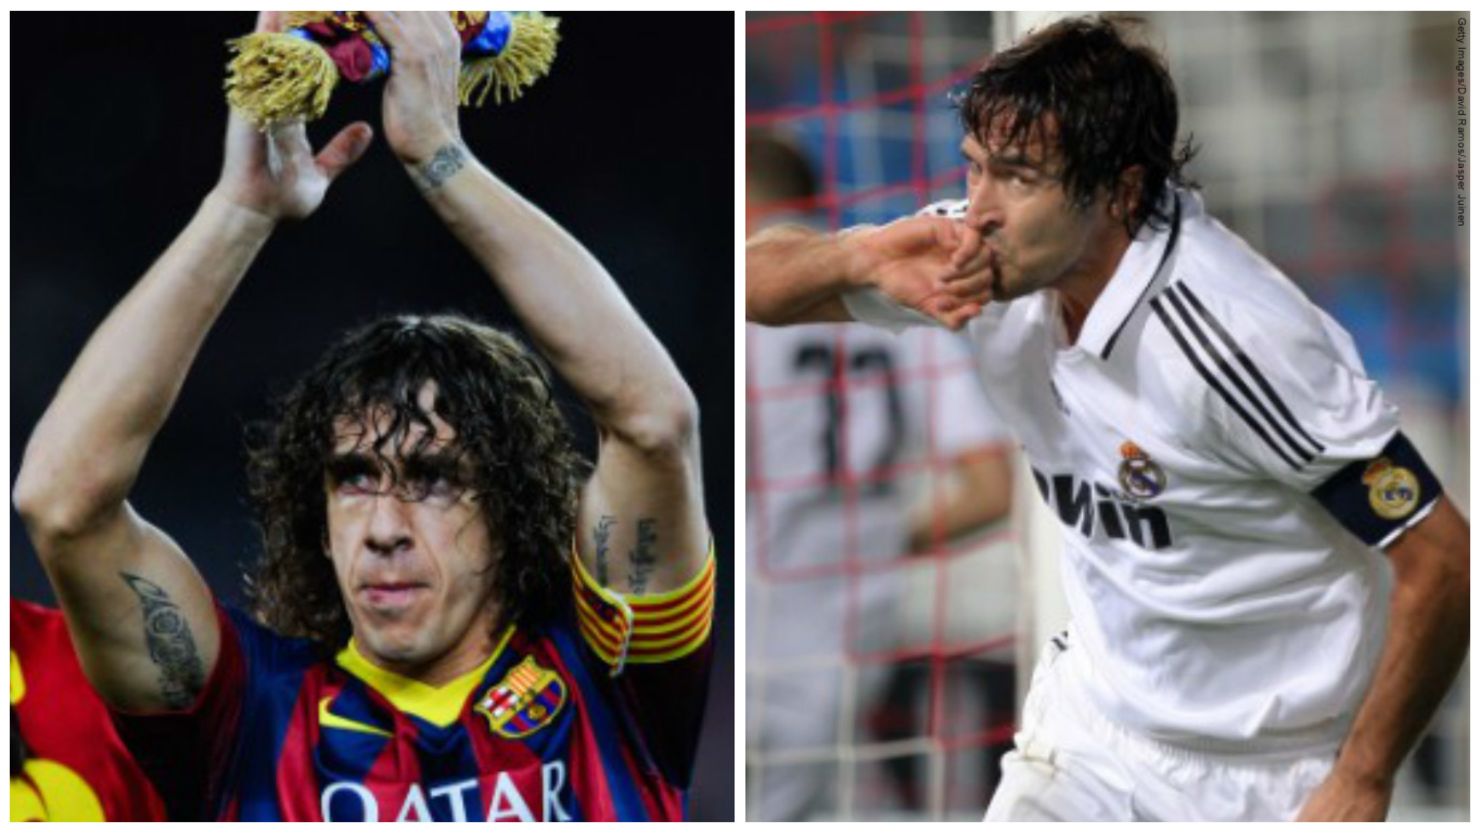 Old rival: Carles Puyol of Barcelona and Real Madrid's Raul.